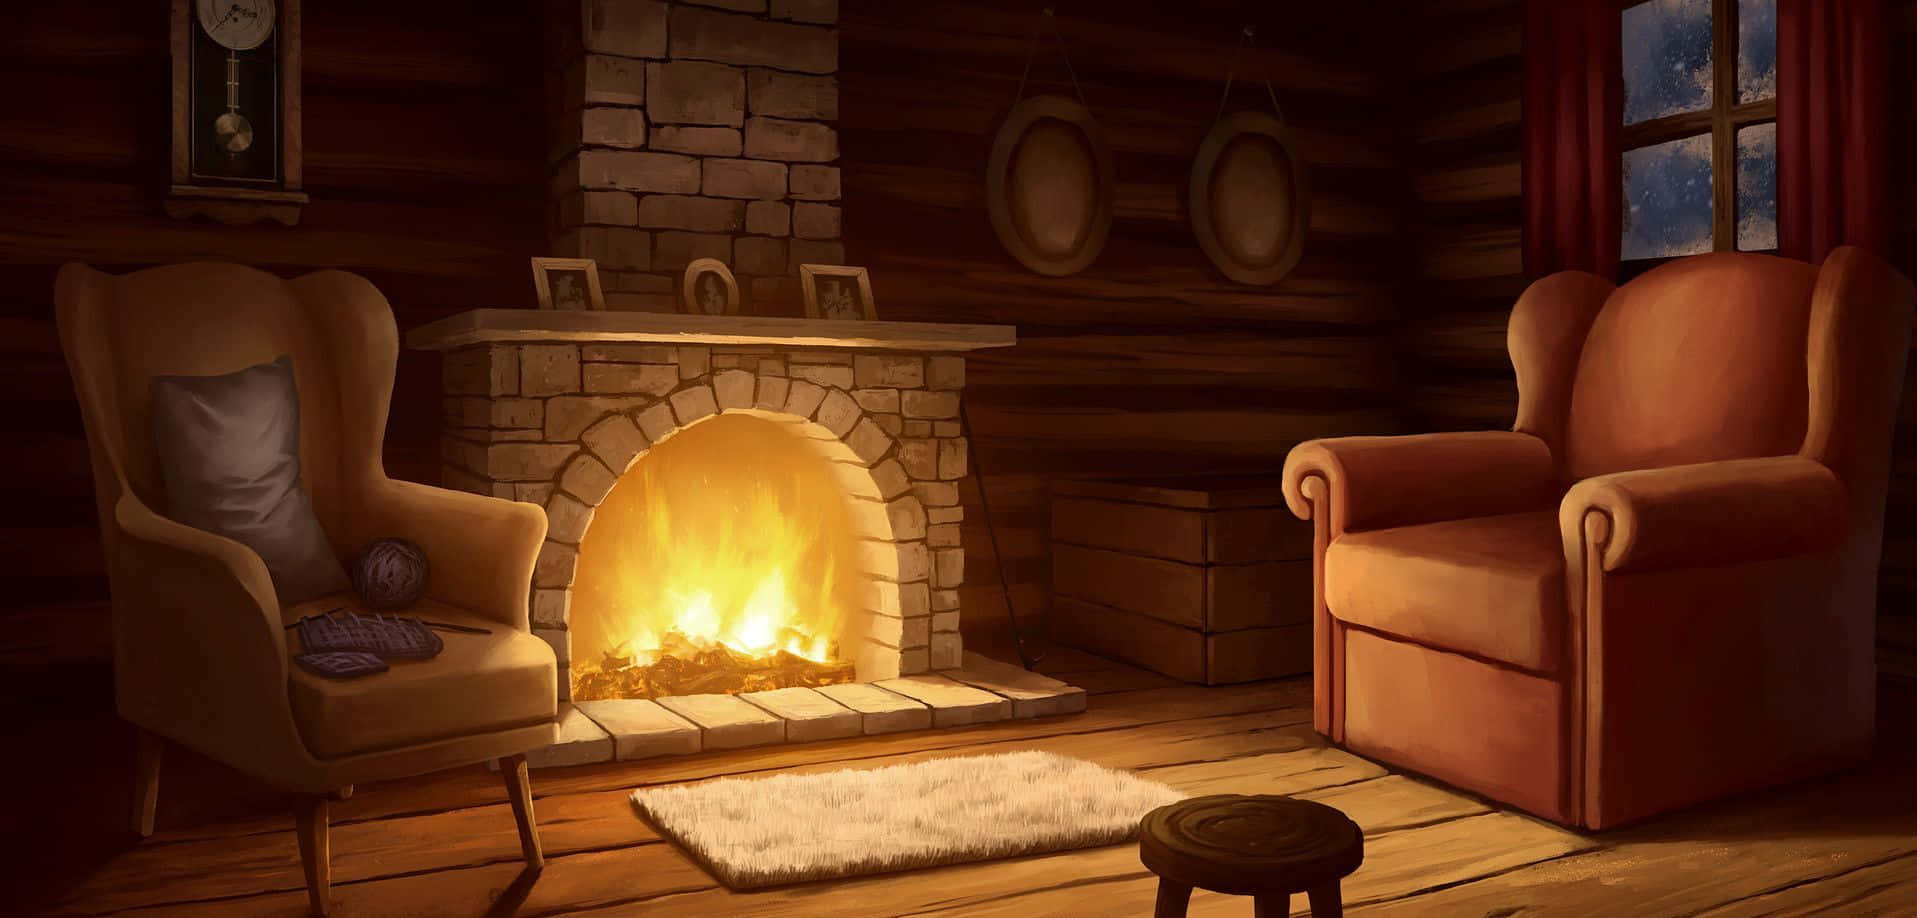 A Cabin With A Fireplace And Chairs